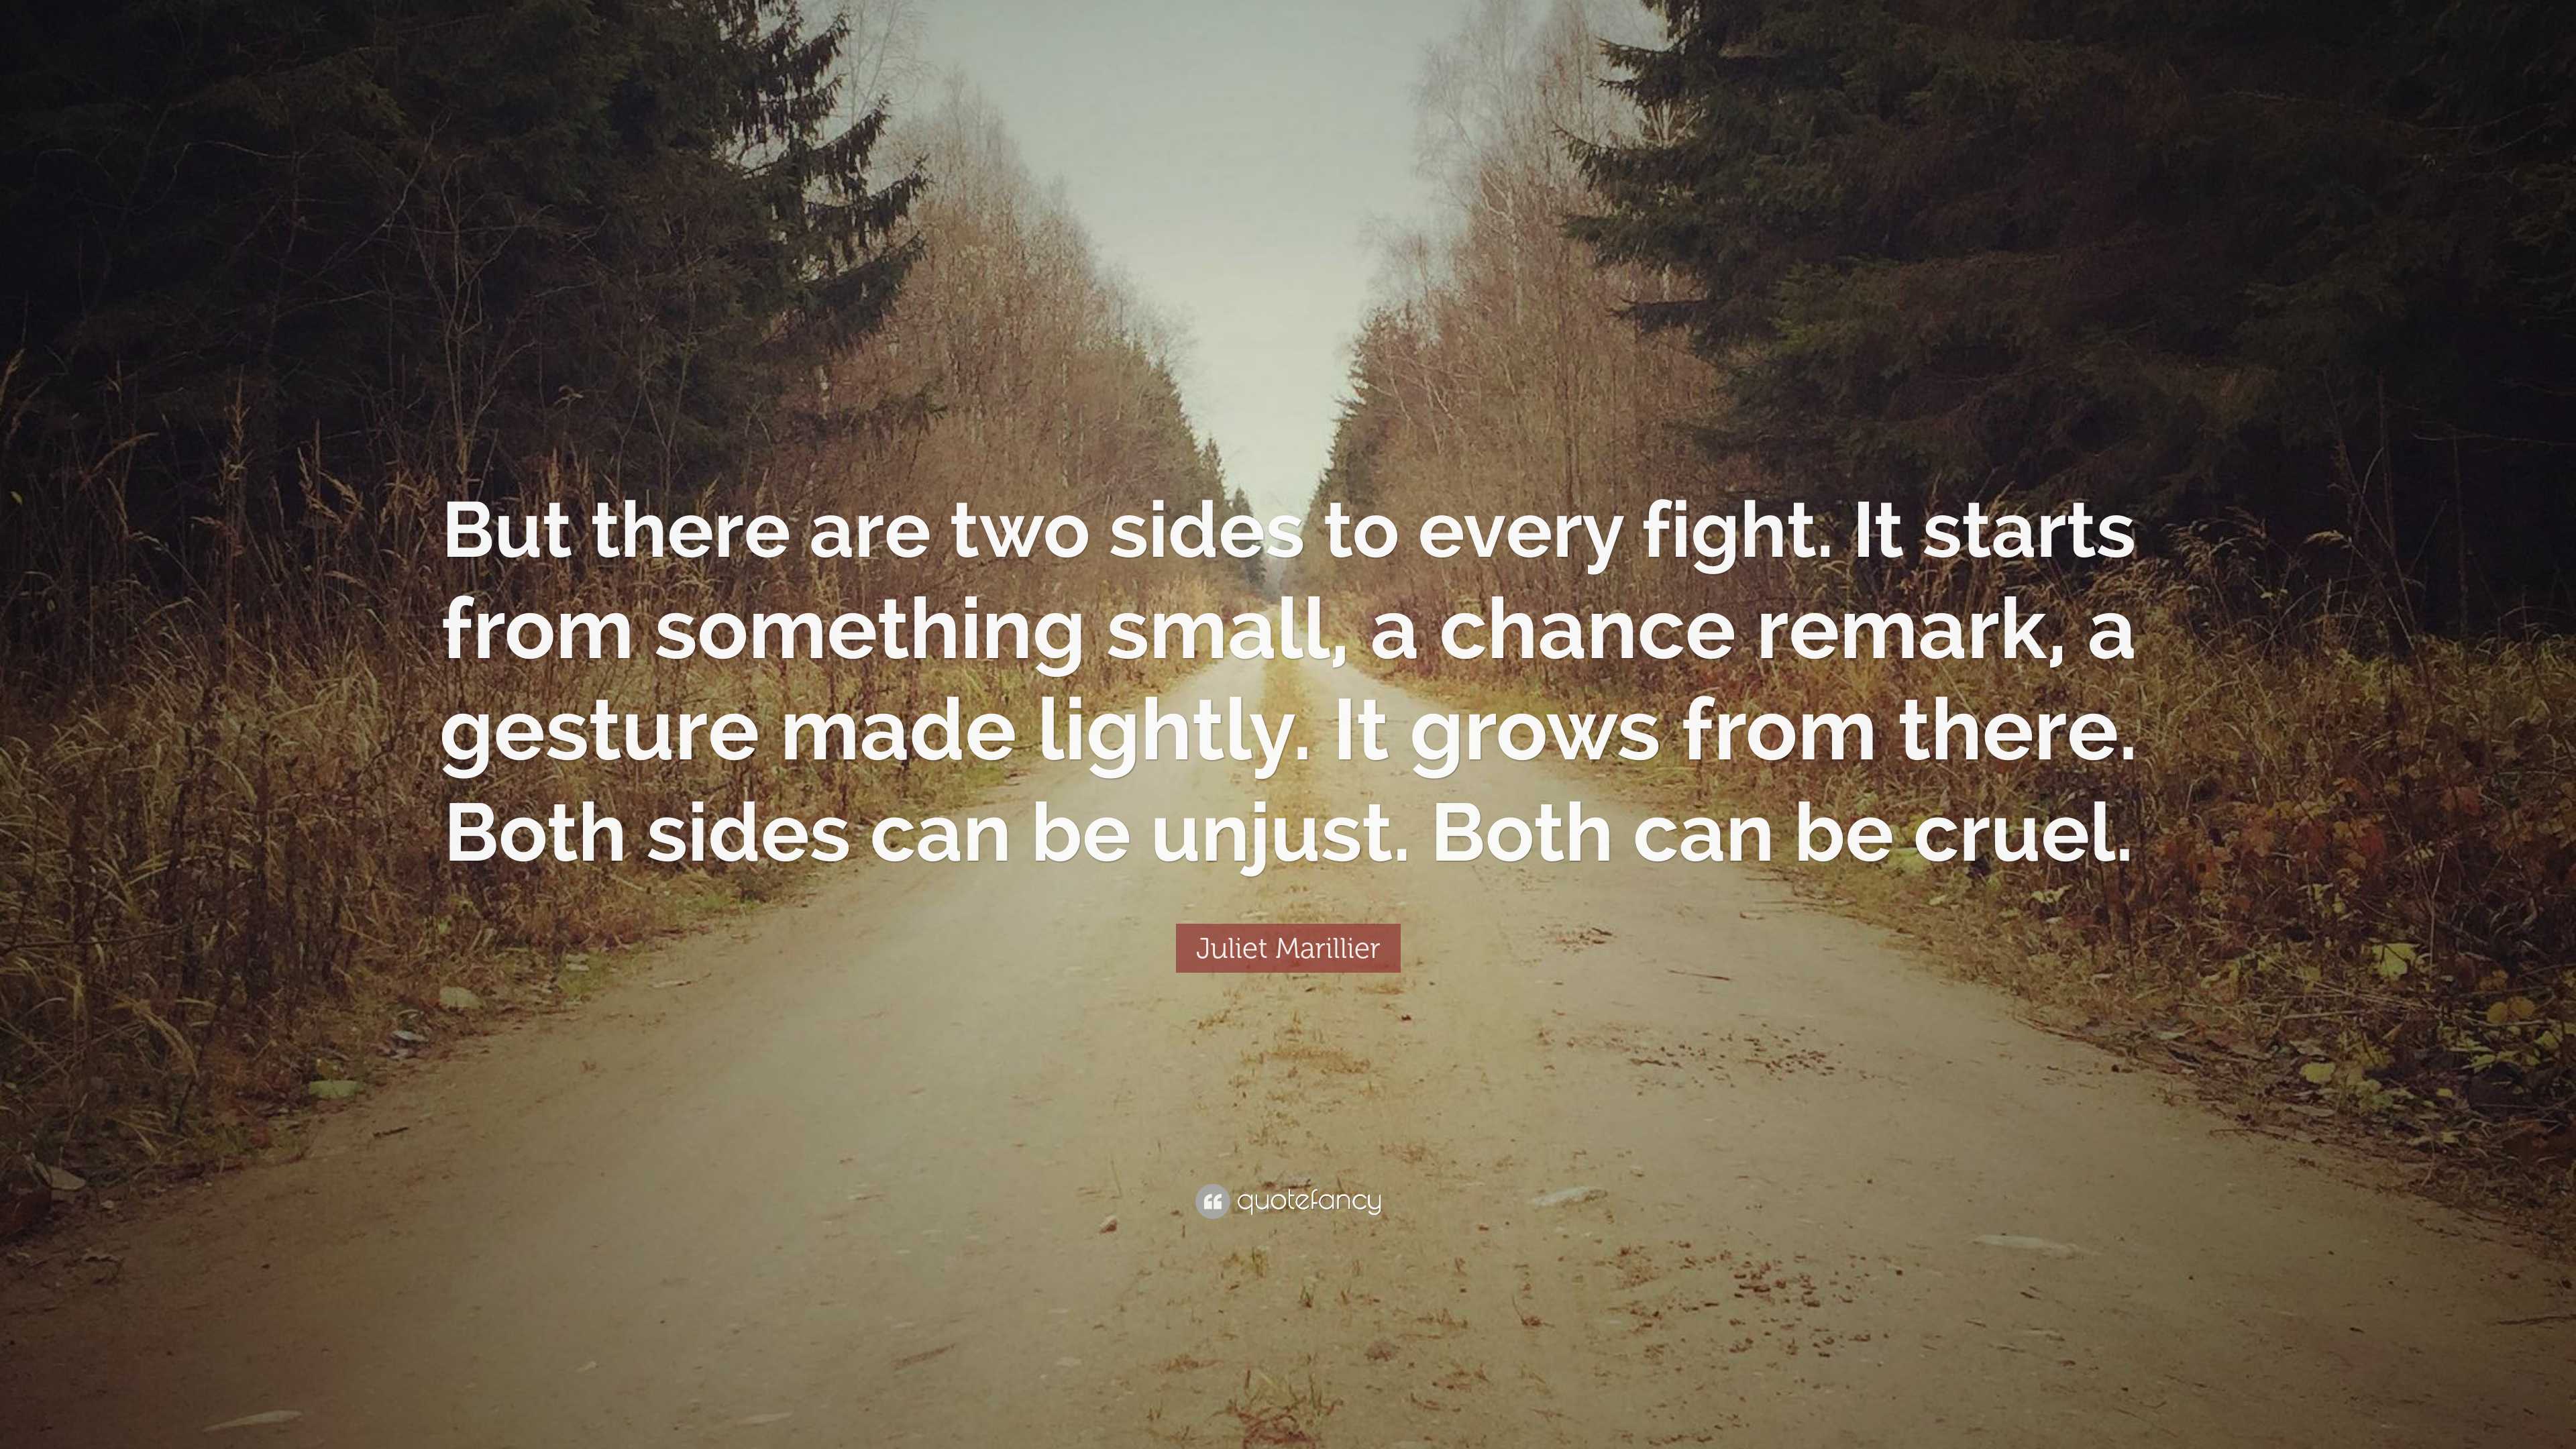 Juliet Marillier Quote: “But there are two sides to every fight